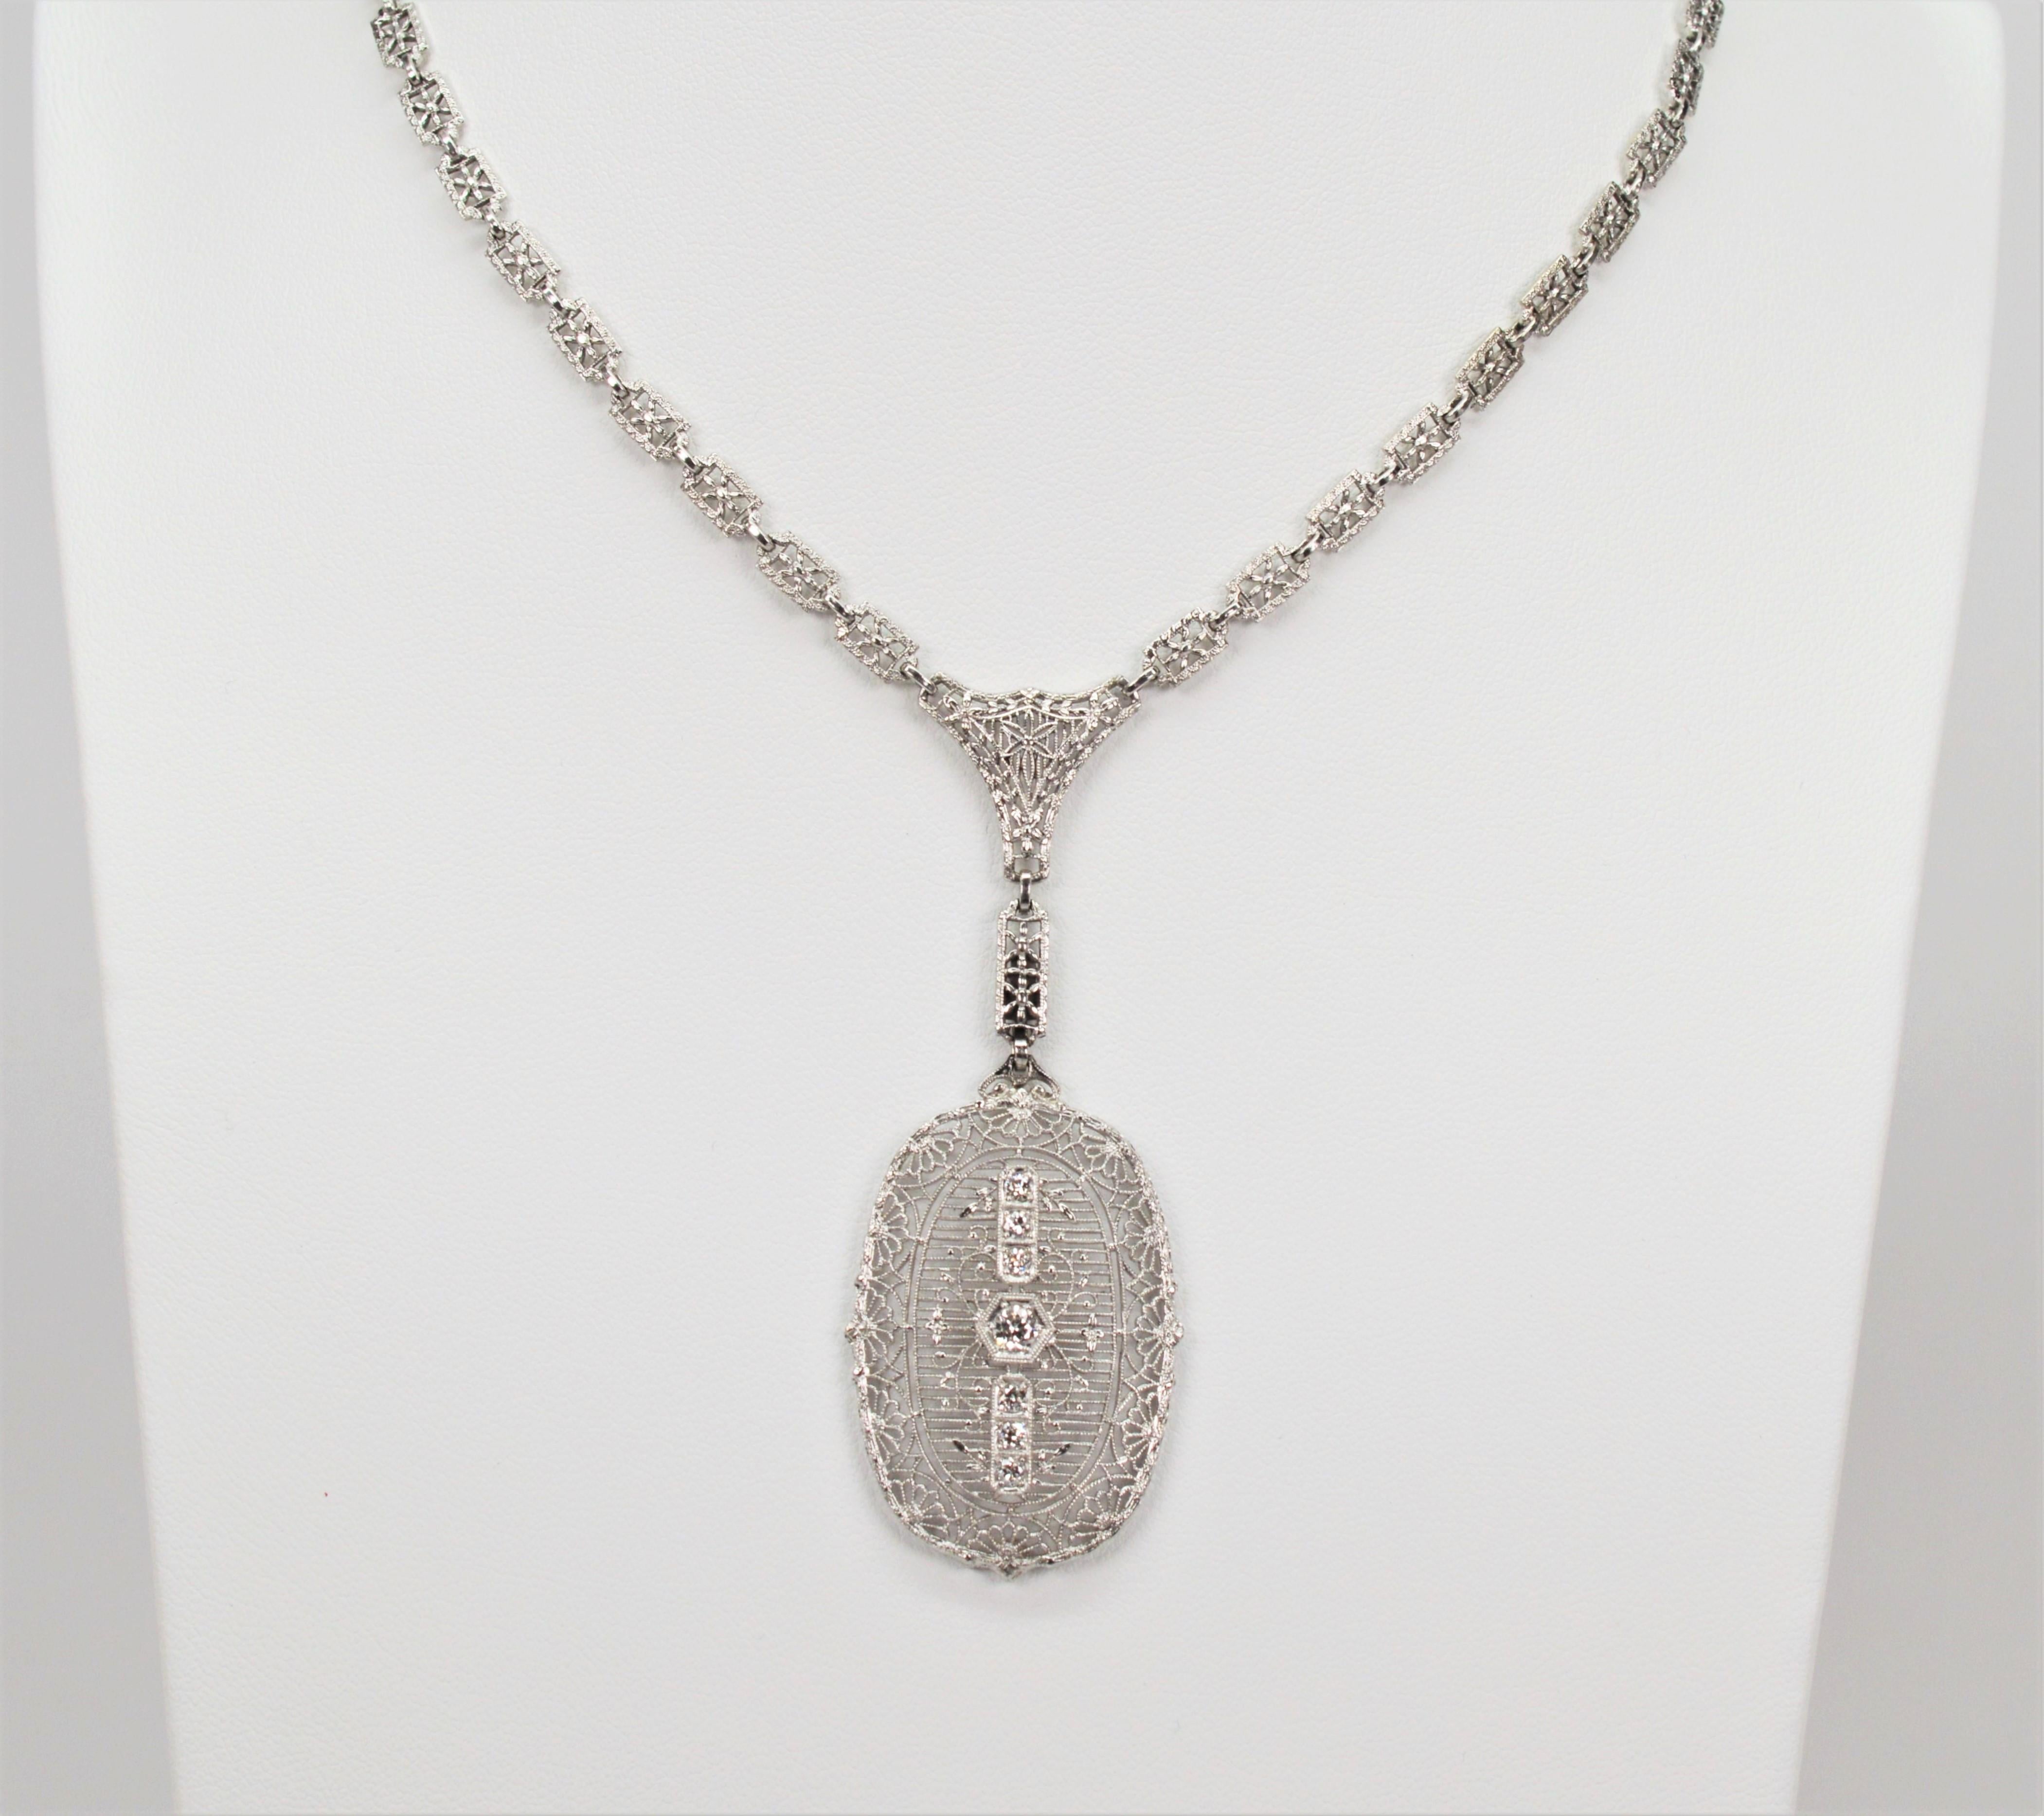 Edwardian Style Platinum White Gold Portrait Pendant Necklace w Diamond Accents In Excellent Condition For Sale In Mount Kisco, NY